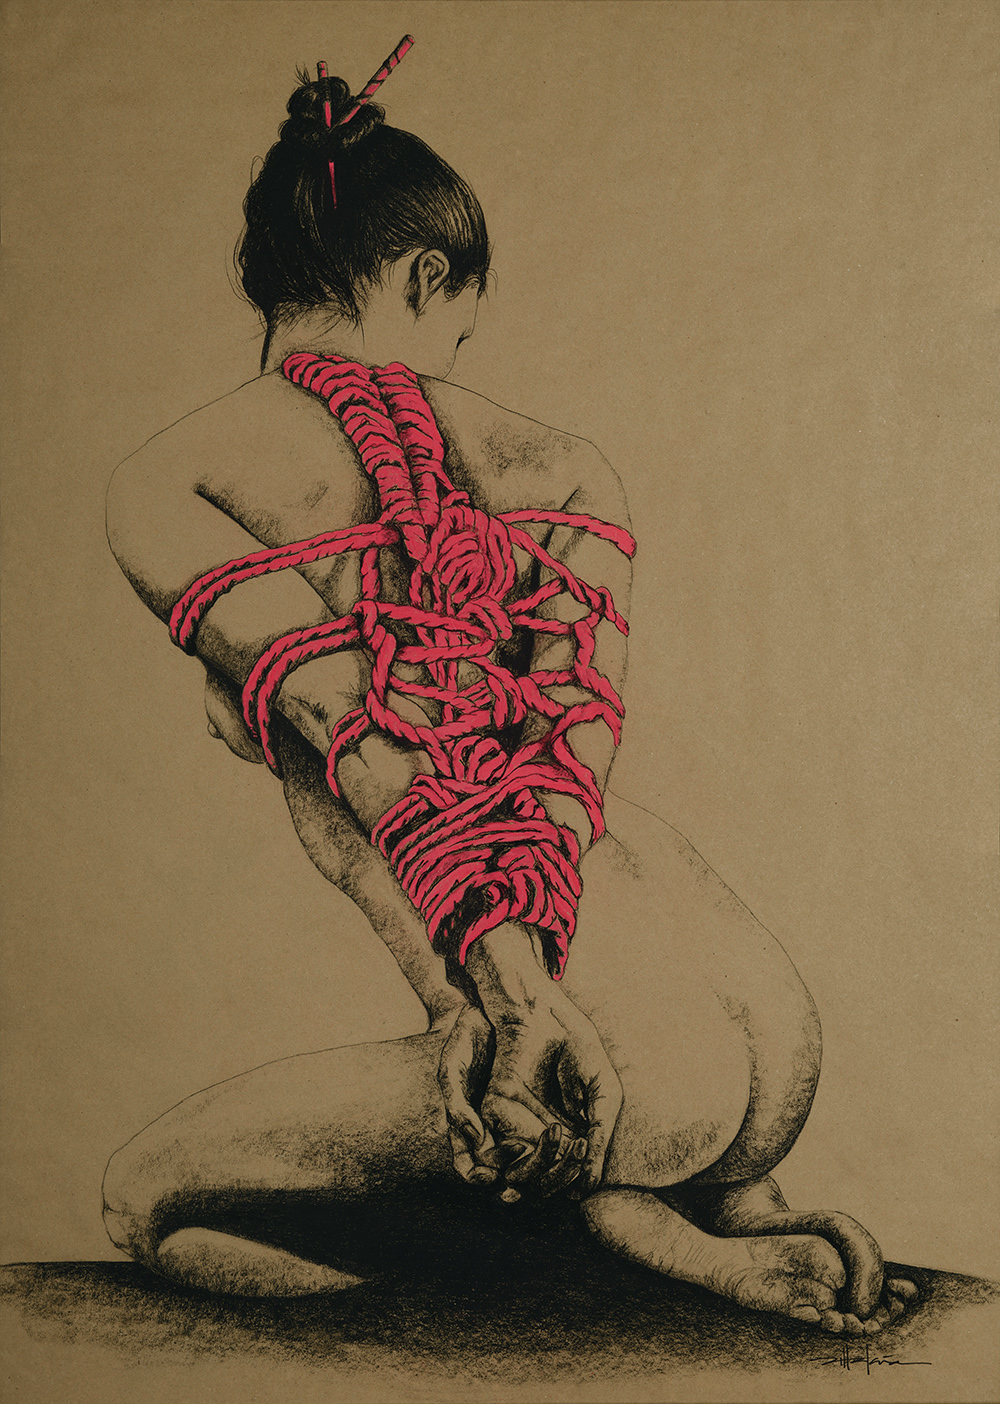 Original Art, Nude Art Female - Charcoal - Graphite, conte, pastel drawing "LADY IN RED" by Marcy Ann Villafaña